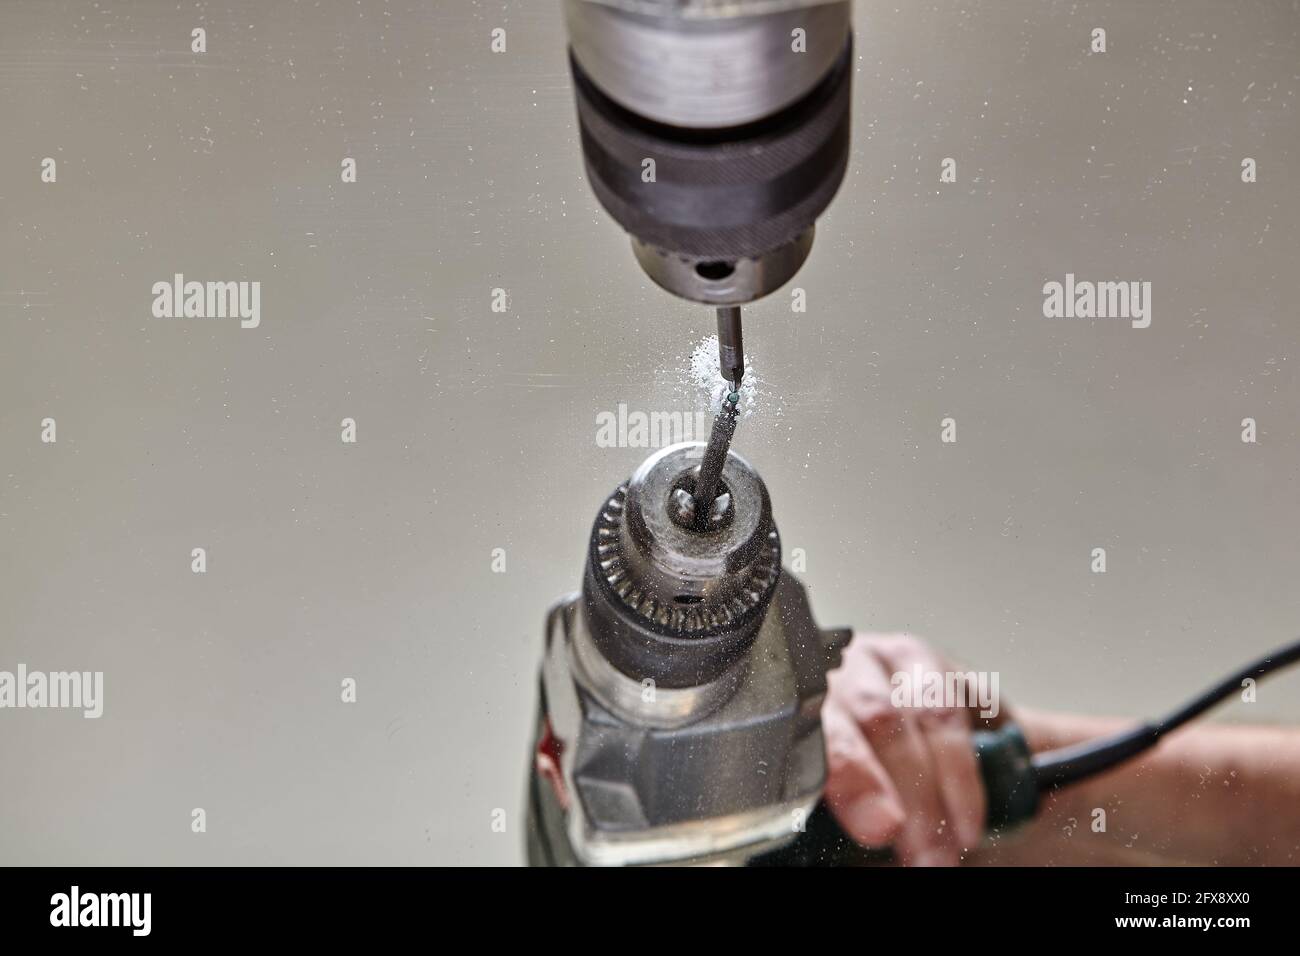 Drilling hole in glass or mirror with special drill bit. Stock Photo